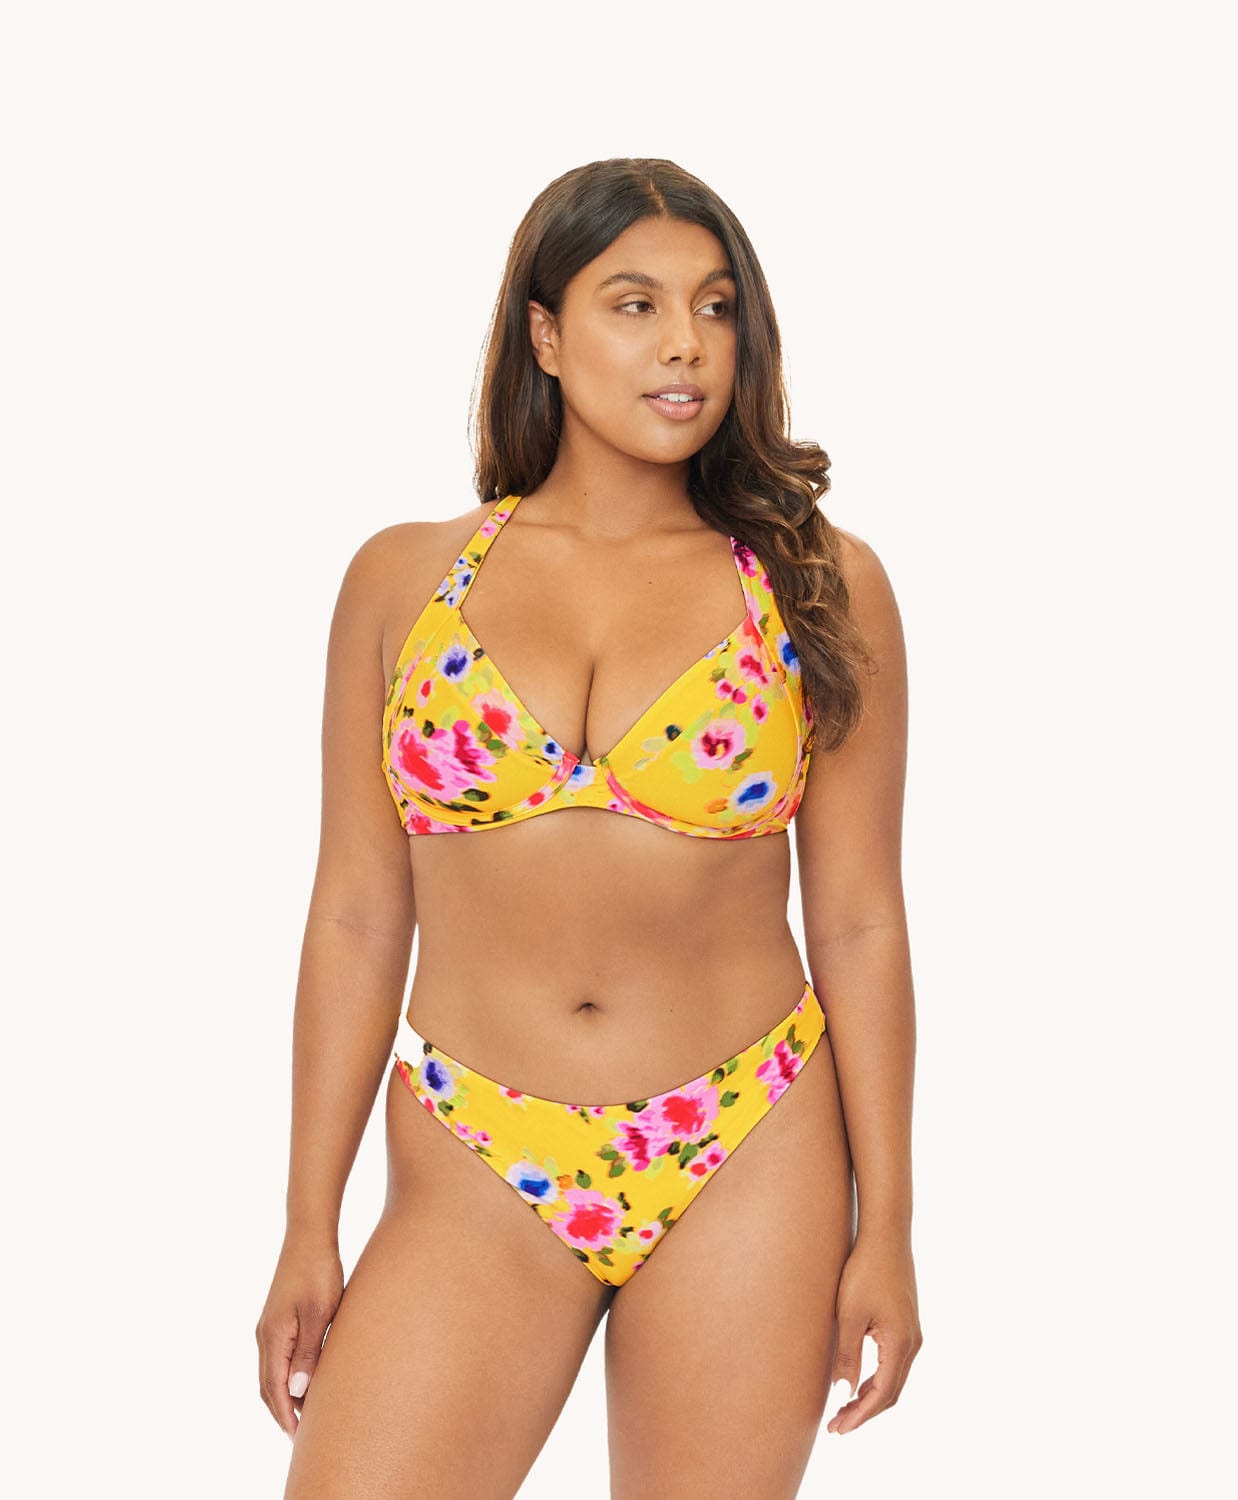 Brunette woman wearing a yellow and flower-patterned bikini in front of a white background. 